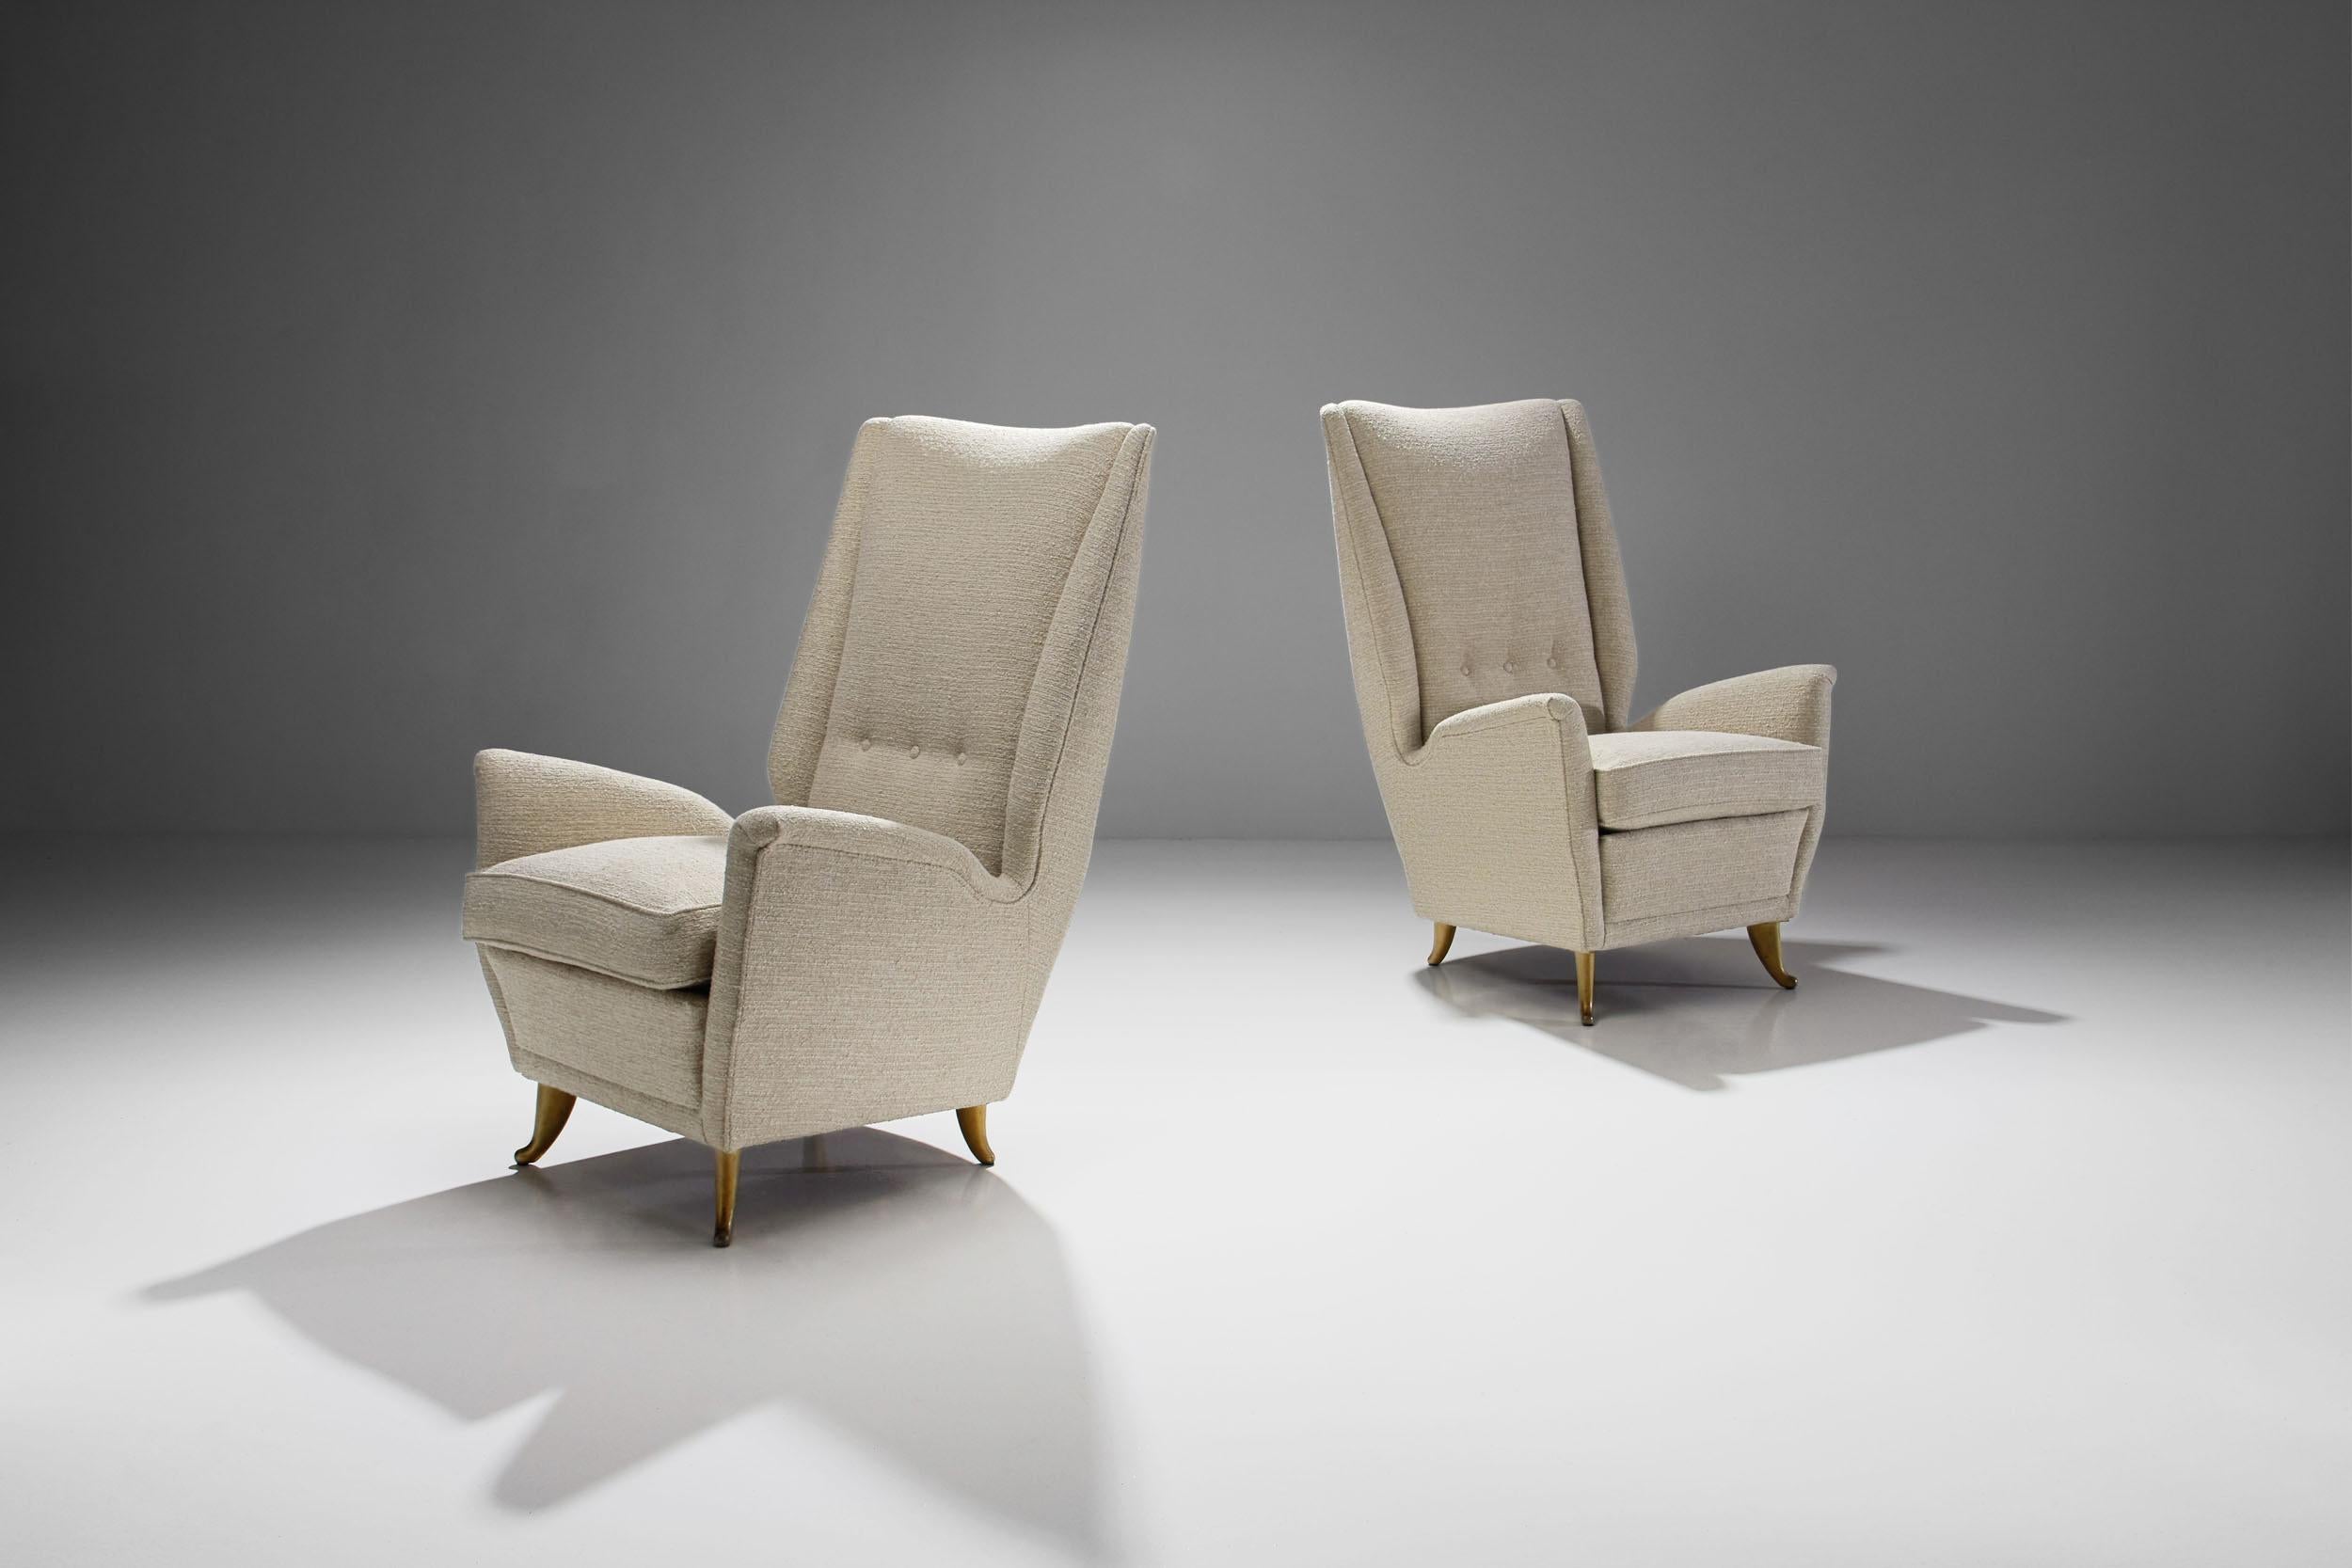 Mid-Century Modern Pair of Lounge Chairs Attributed to Gio Ponti for ISA Bergamo, Italy 1950s For Sale